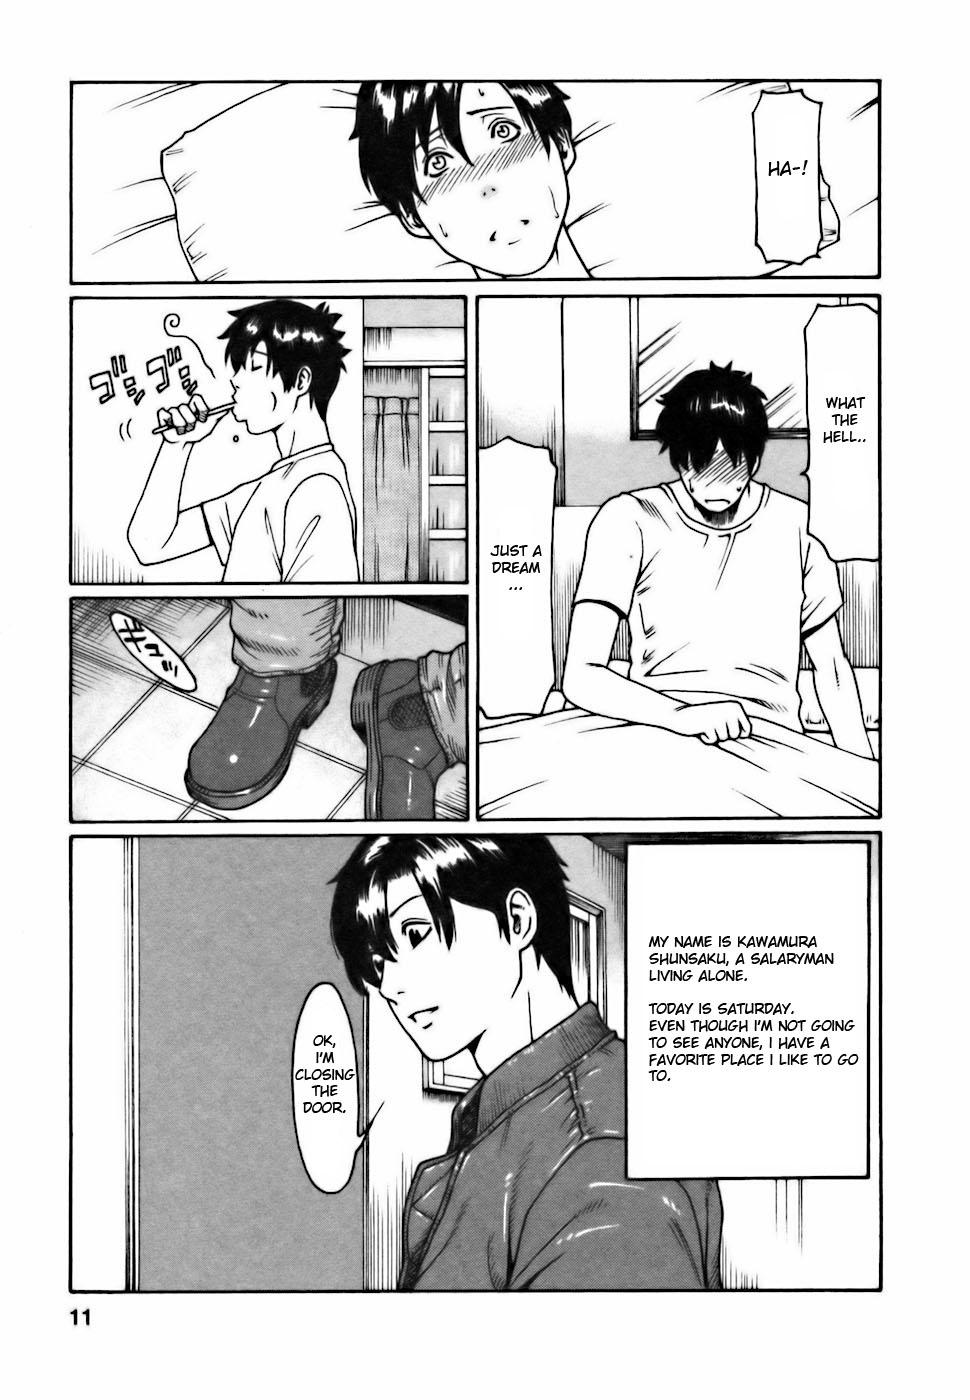 Cafe e Youkoso - Welcome To A Cafe Ch. 1 10